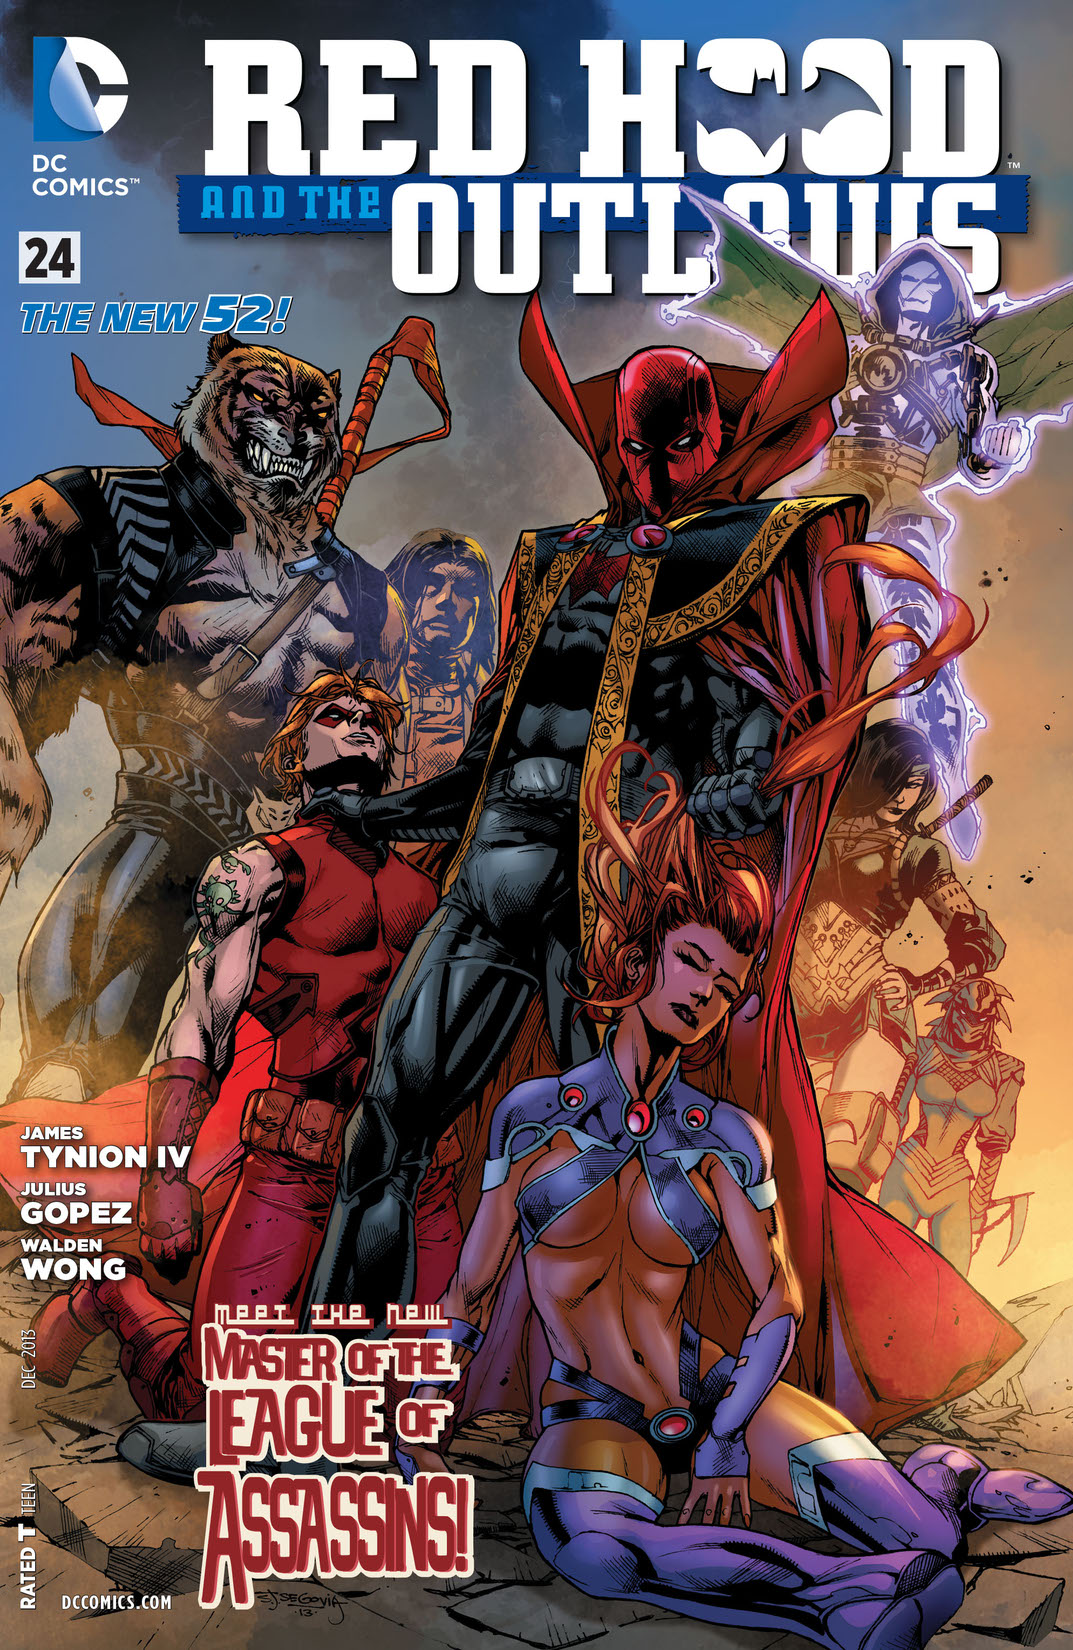 Red Hood and the Outlaws (2011-) #24 preview images